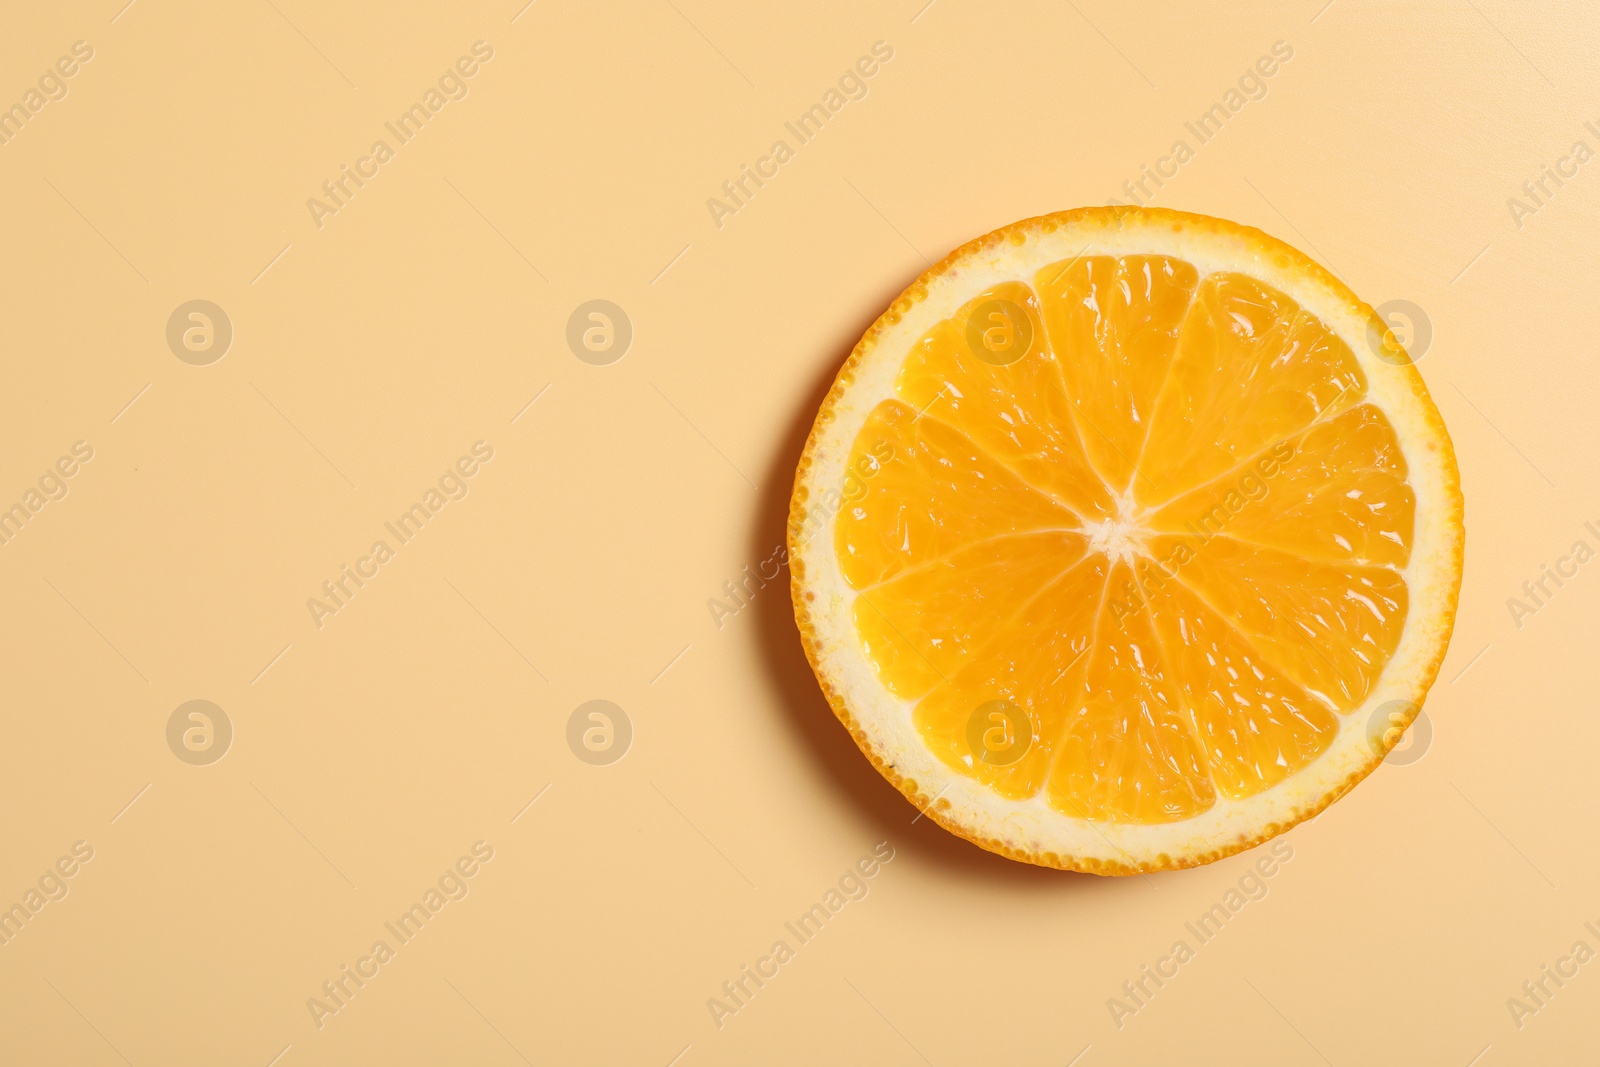 Photo of Slice of juicy orange on beige background, top view. Space for text